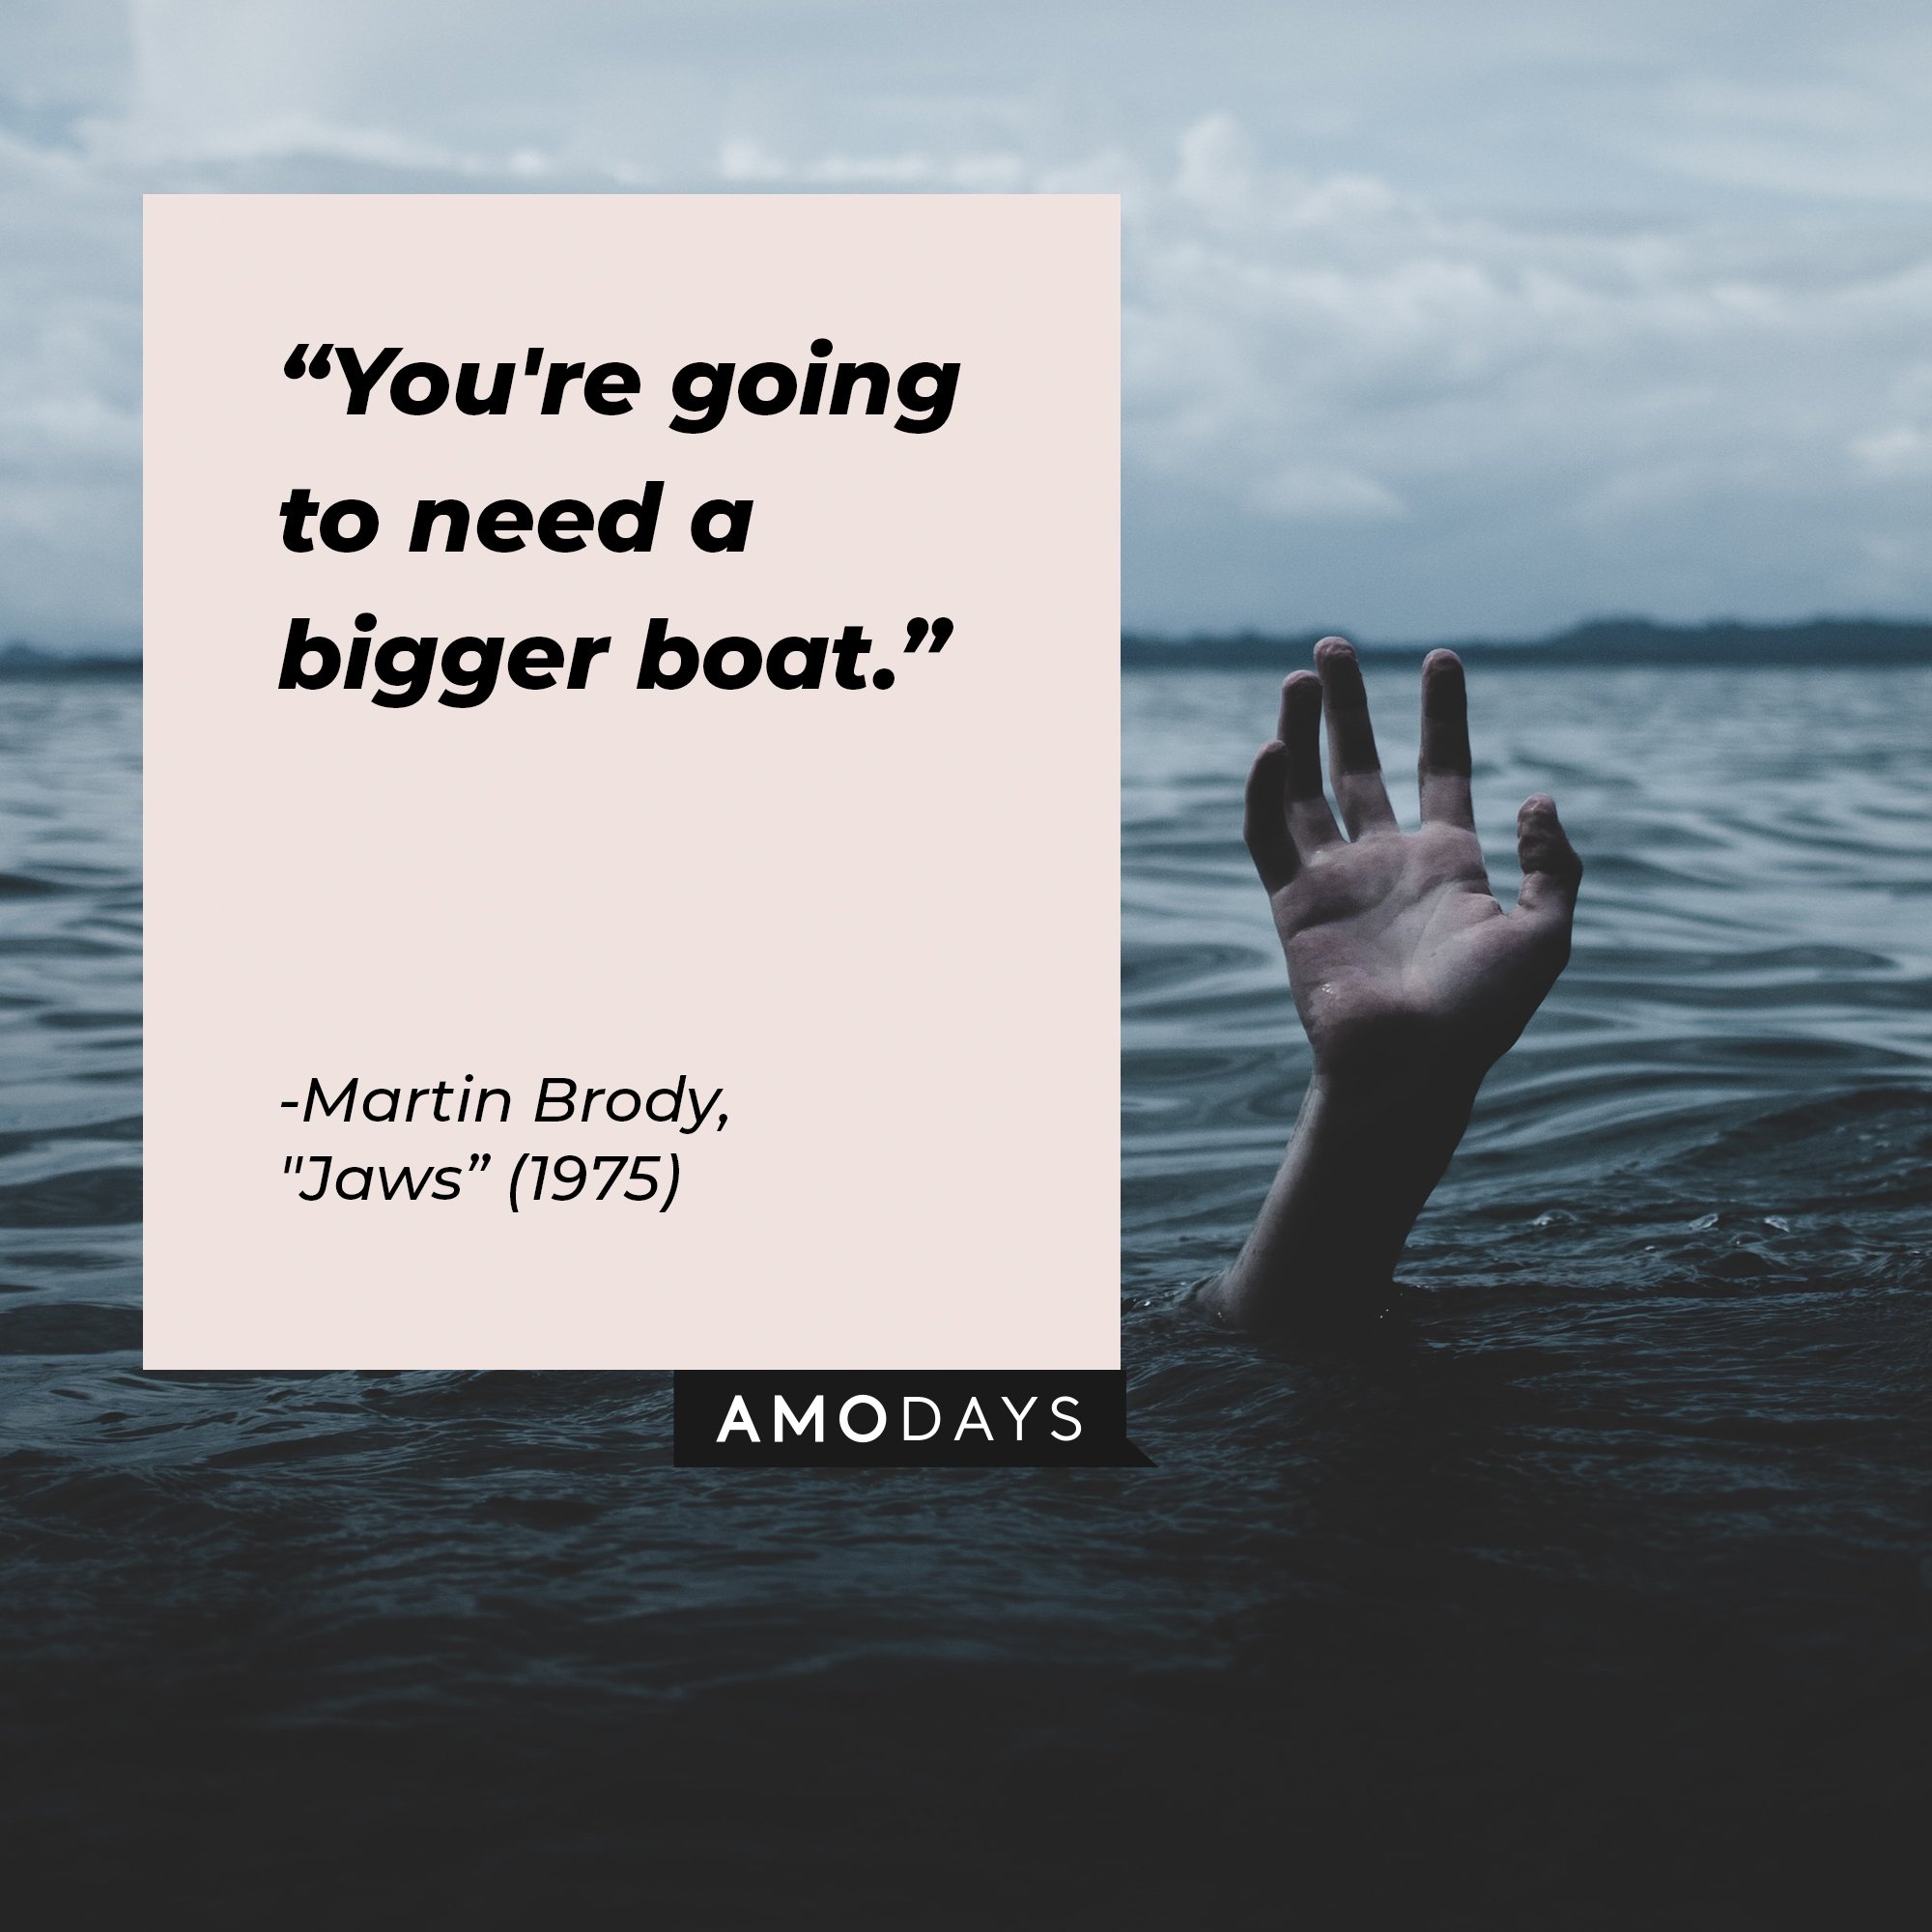 Martin Brody’s quote from, "Jaws” (1975): "You're going to need a bigger boat." | Image: AmoDays